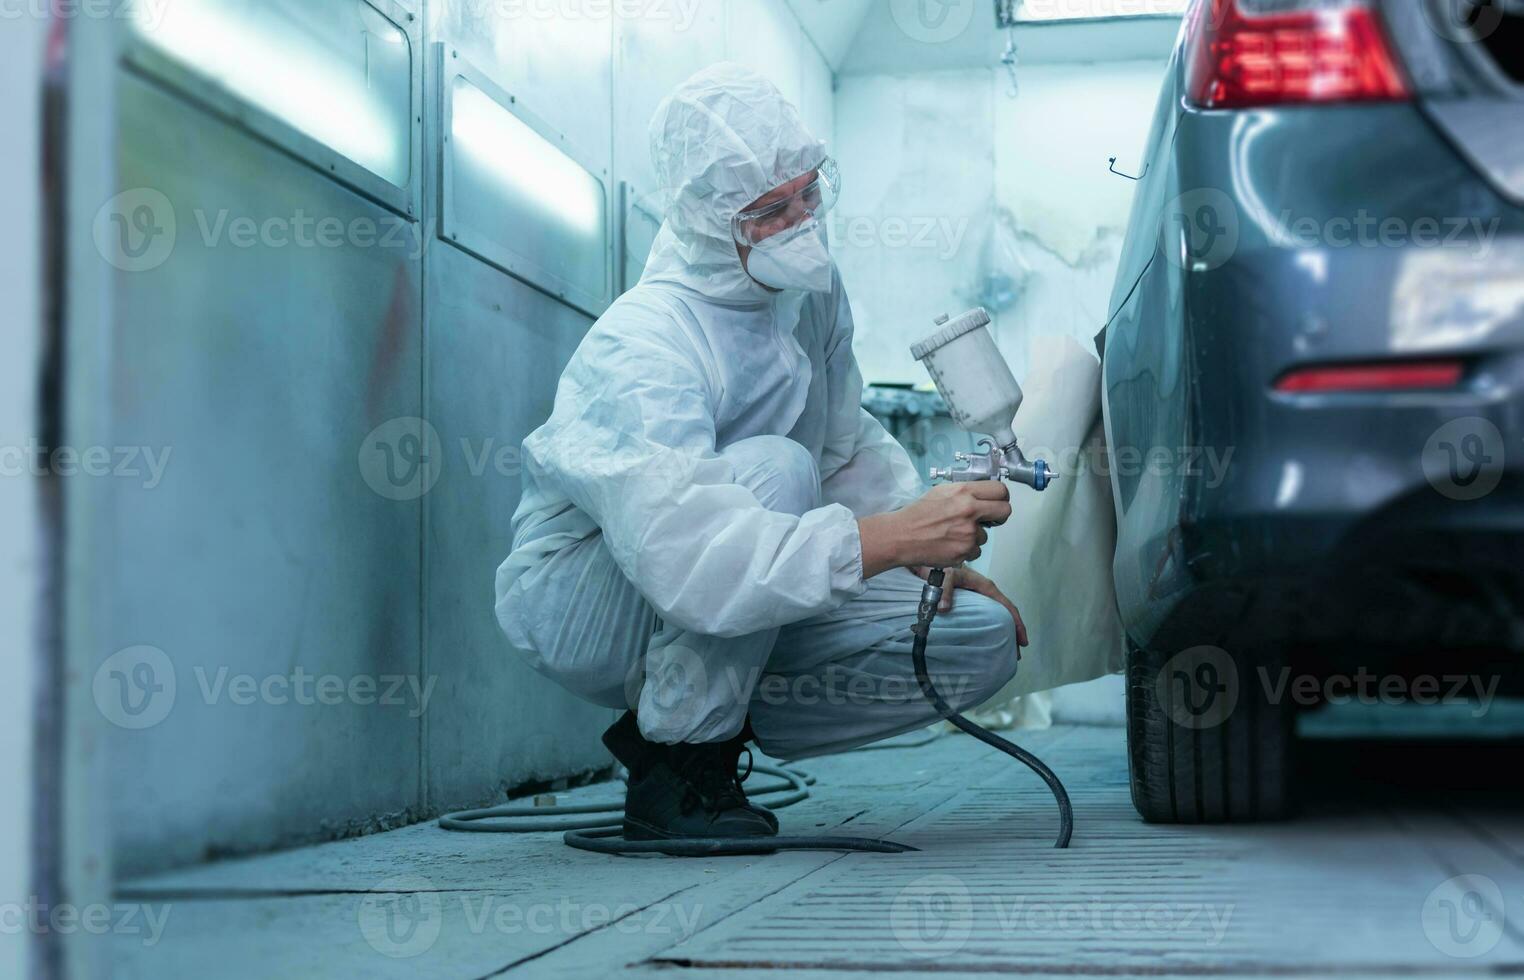 Mechanic painting car in chamber. Worker using spray gun and airbrush and painting a car, Garage painting car service repair and maintenance photo